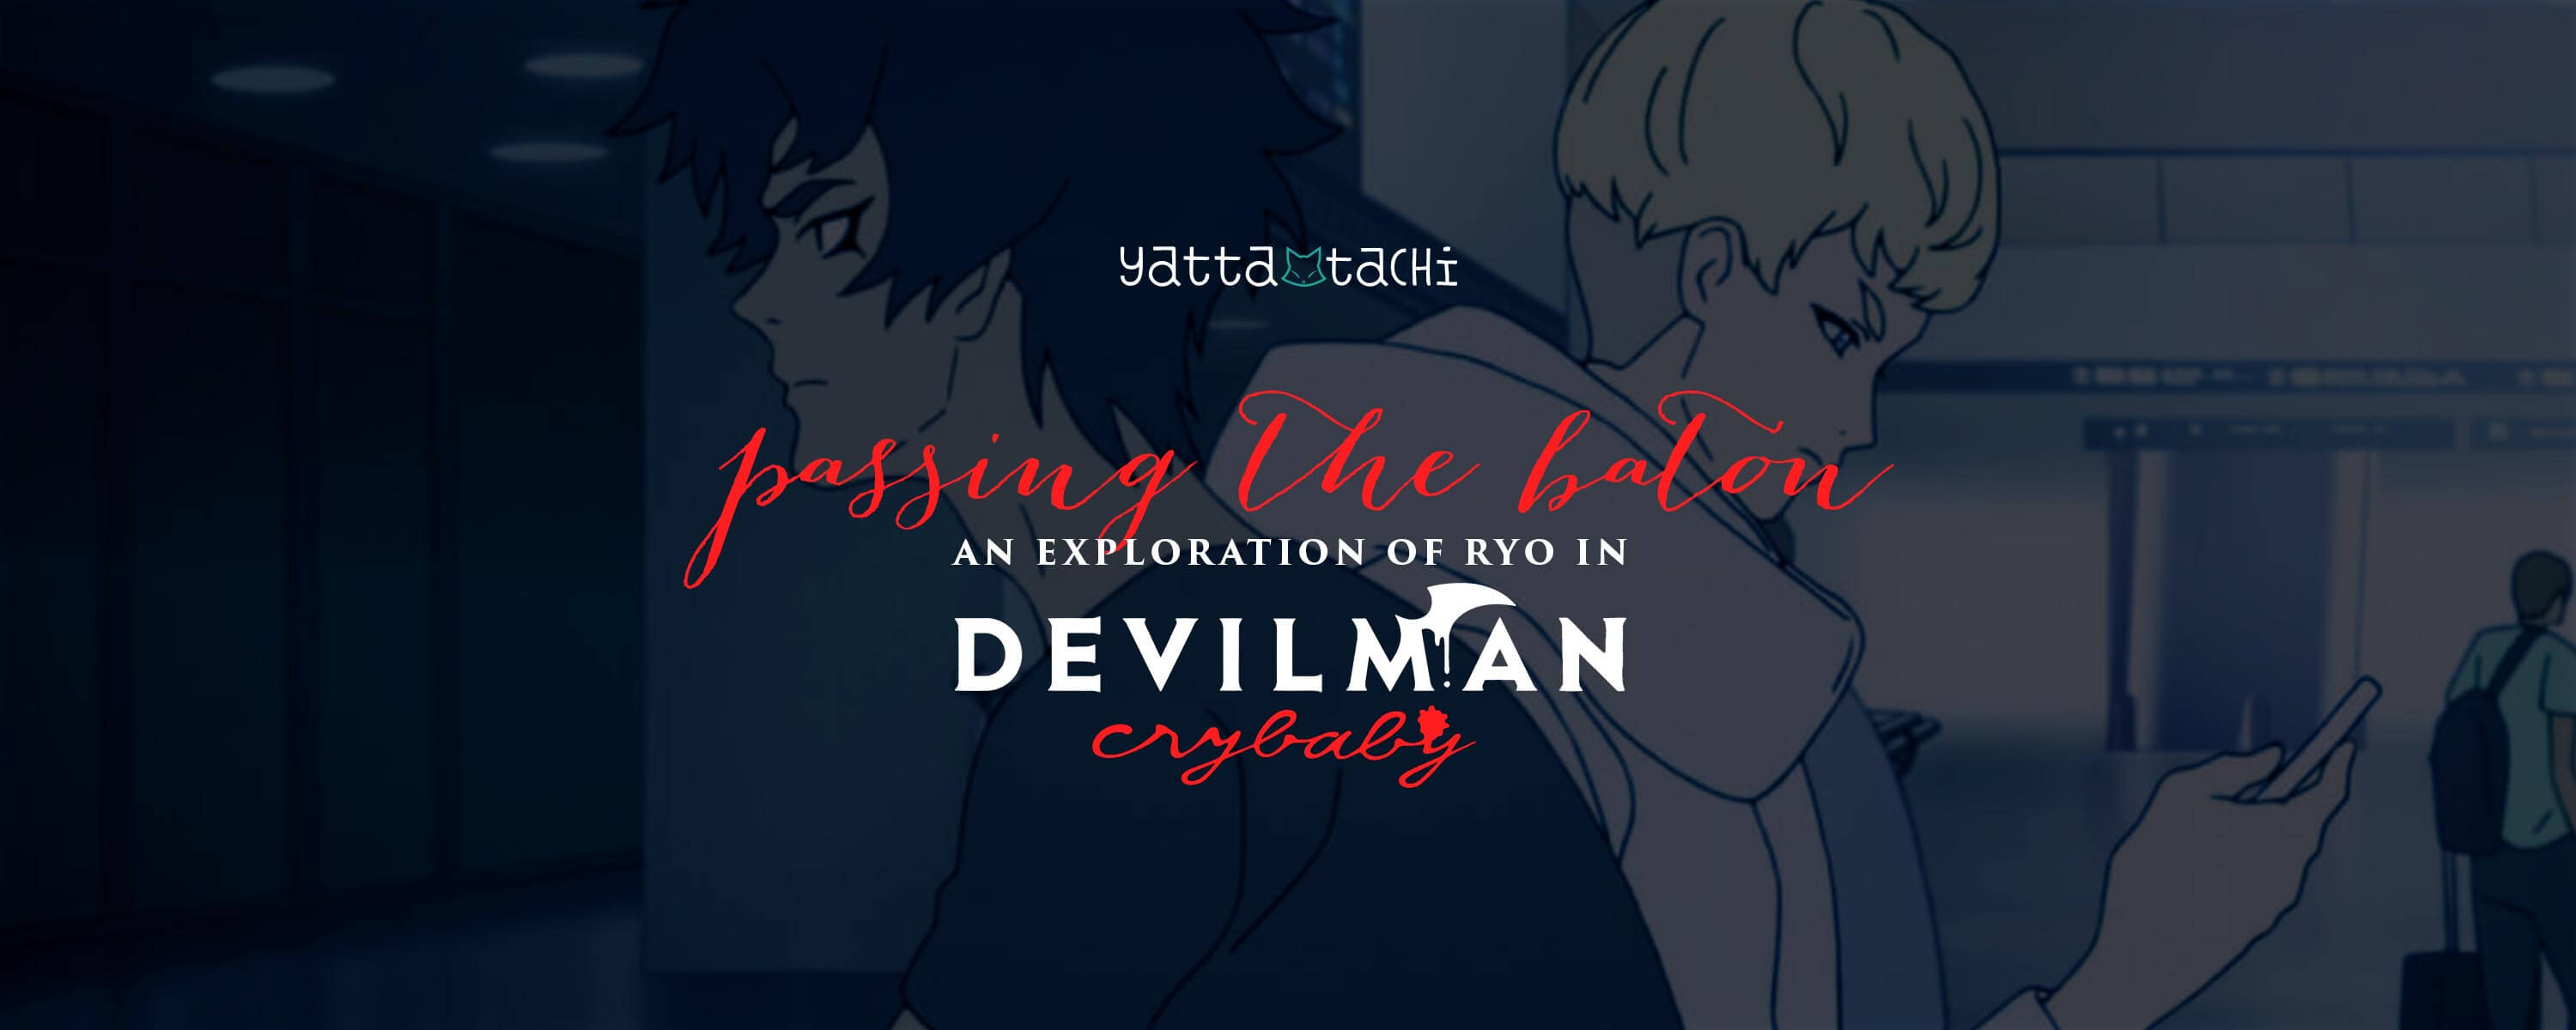 Find The Amazing Facts About Devilman Crybaby Anime, Release Date, Main  Plot, Characters, and Voice Actors - Anime Superior